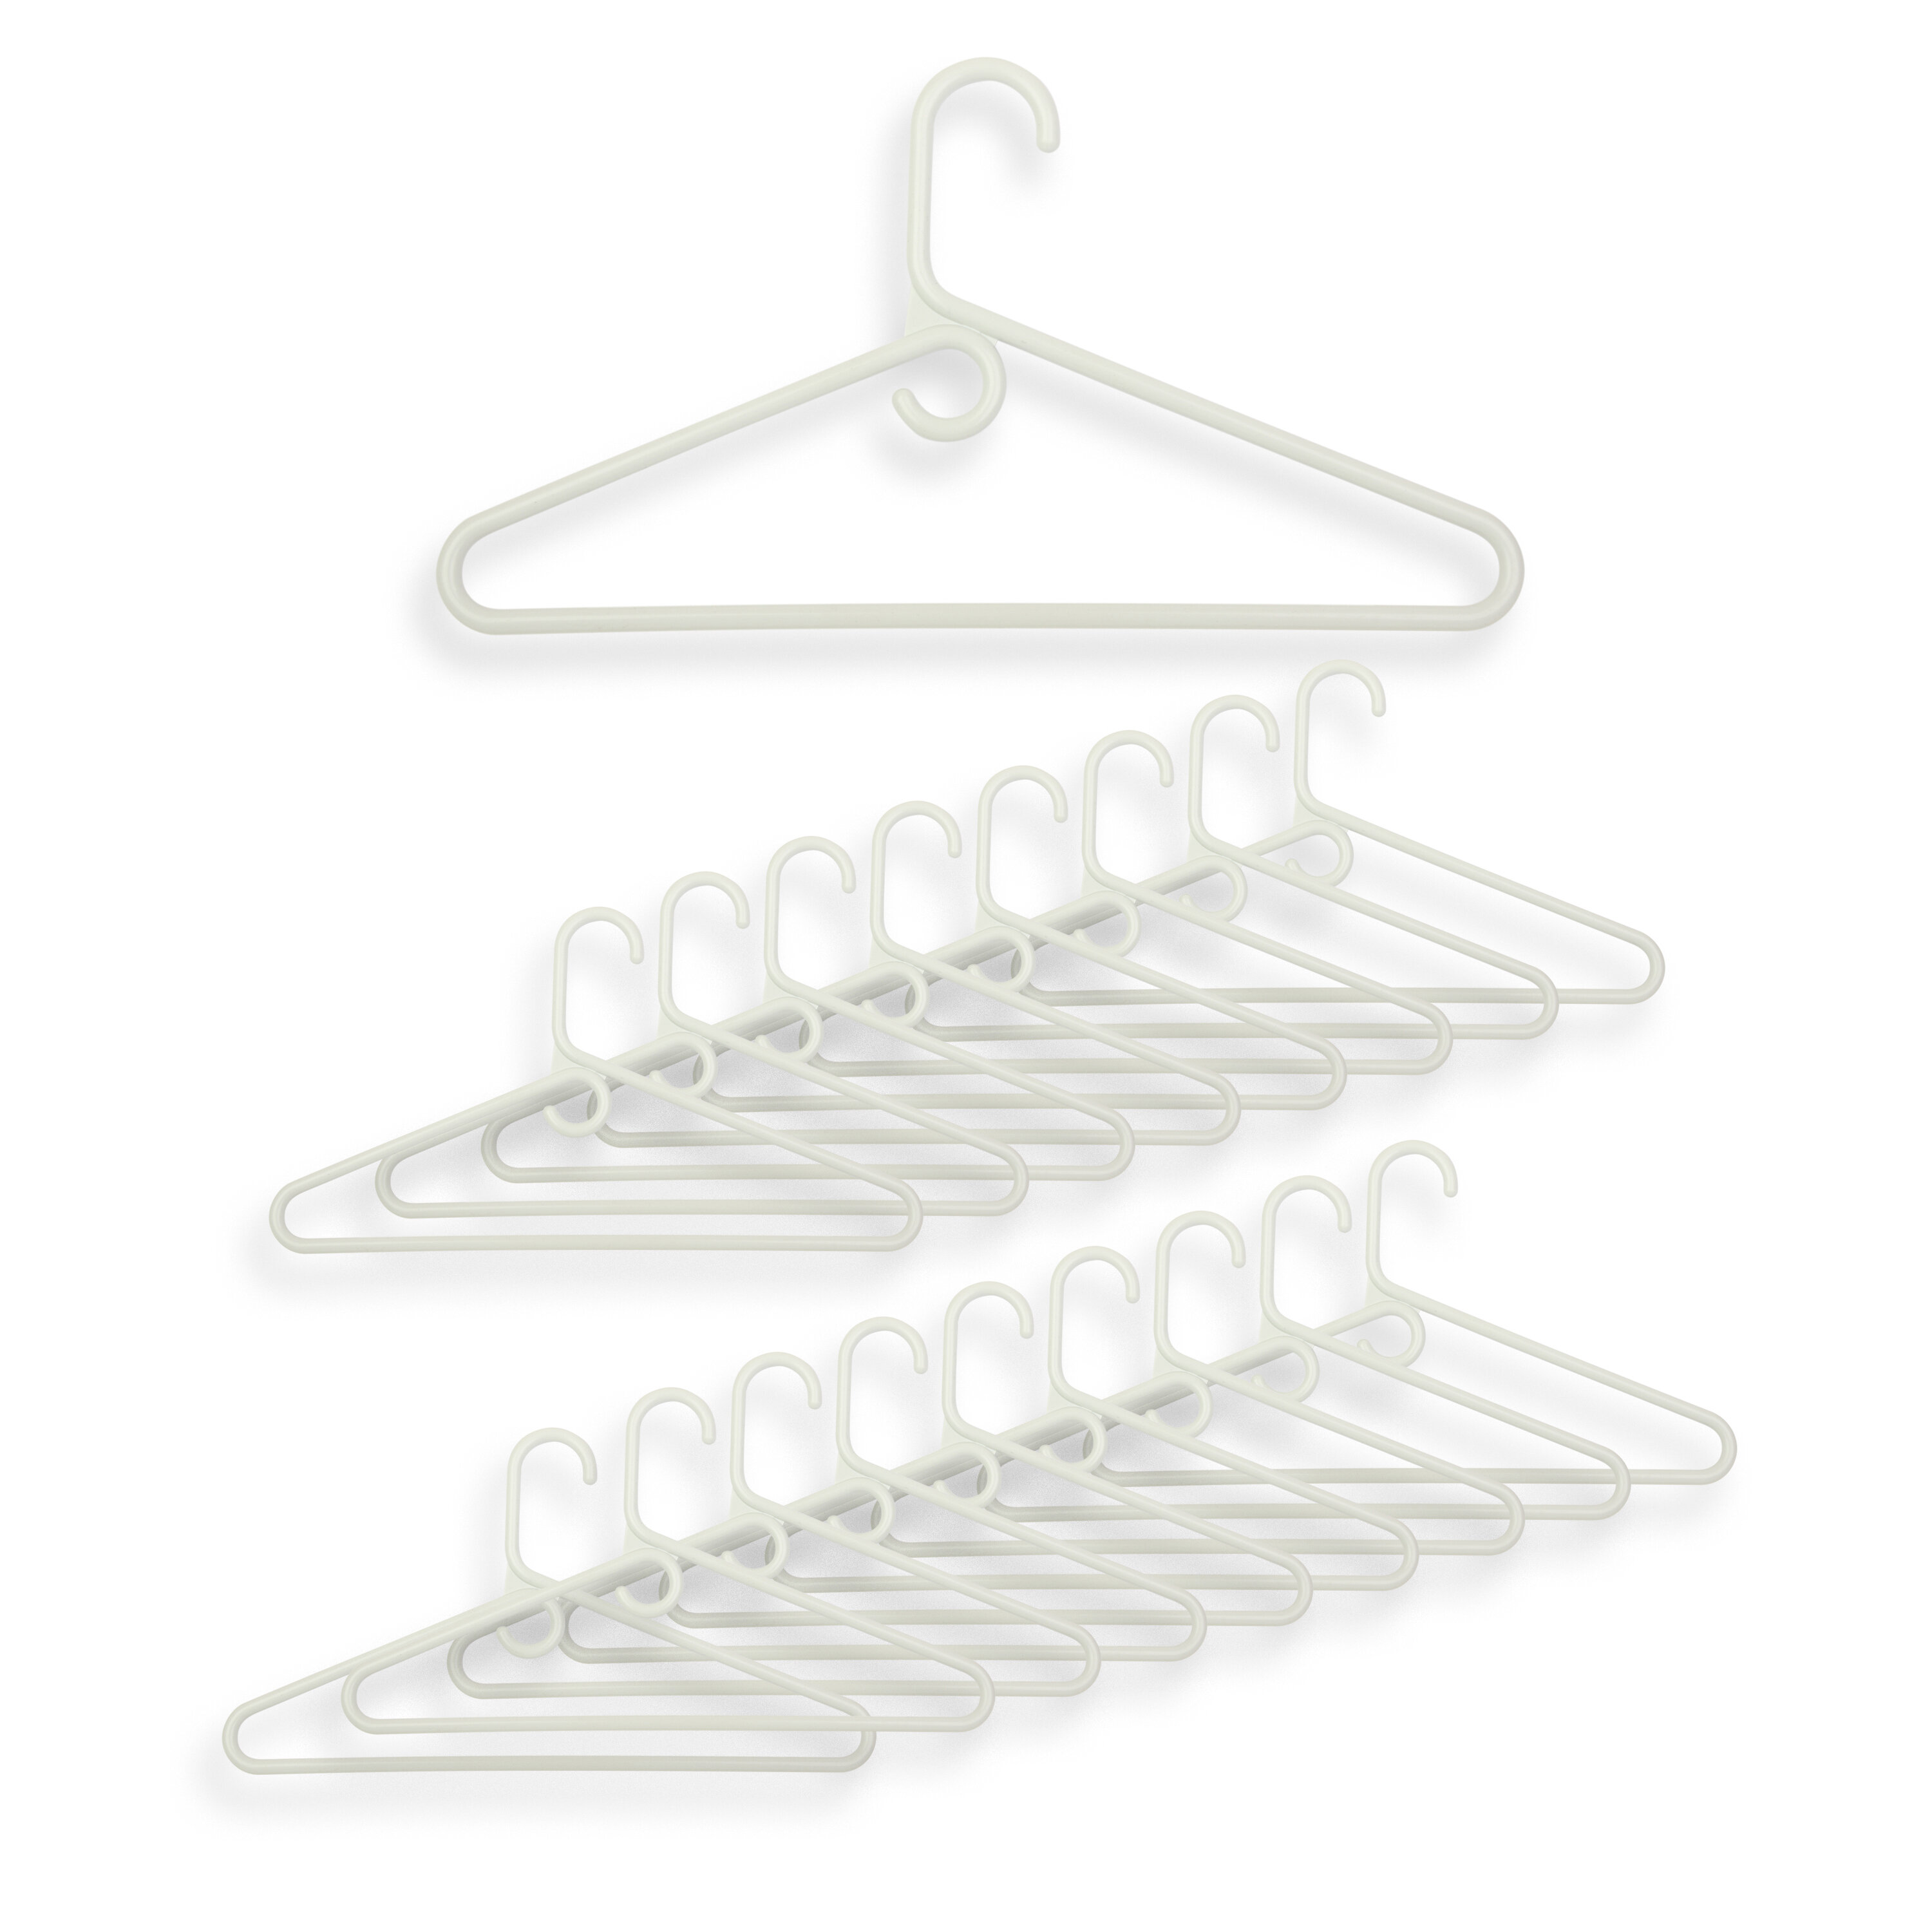 Honey-Can-Do Recycled Plastic Petite Clothing Hangers, 60 Pack, White 